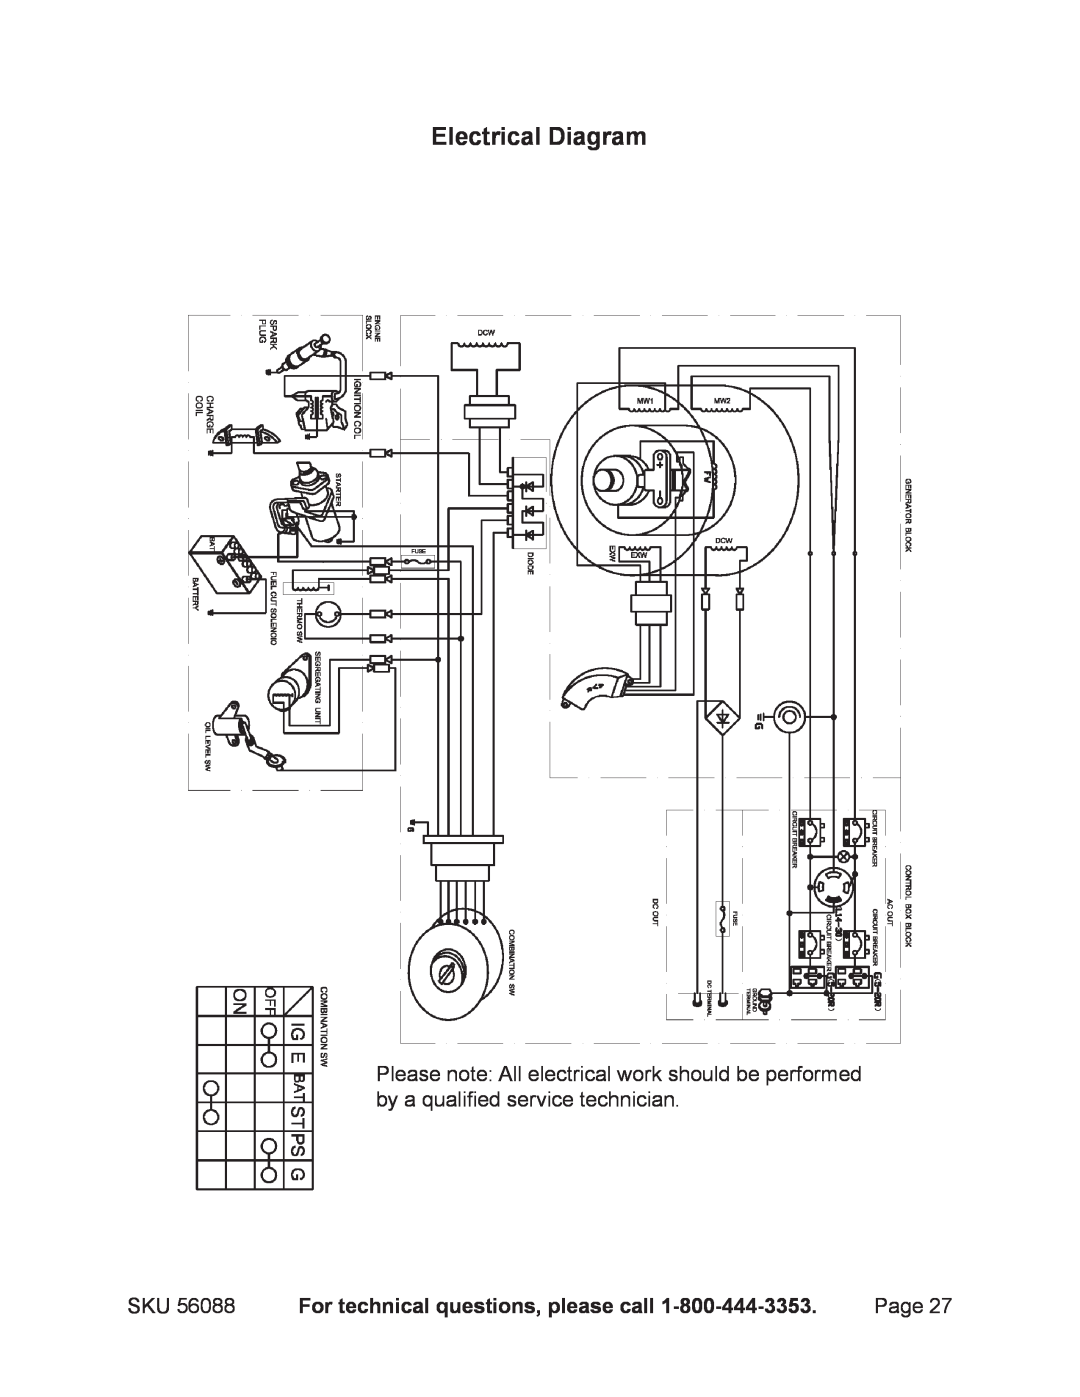 Harbor Freight Tools 56088 warranty Electrical Diagram, For technical questions, please call 